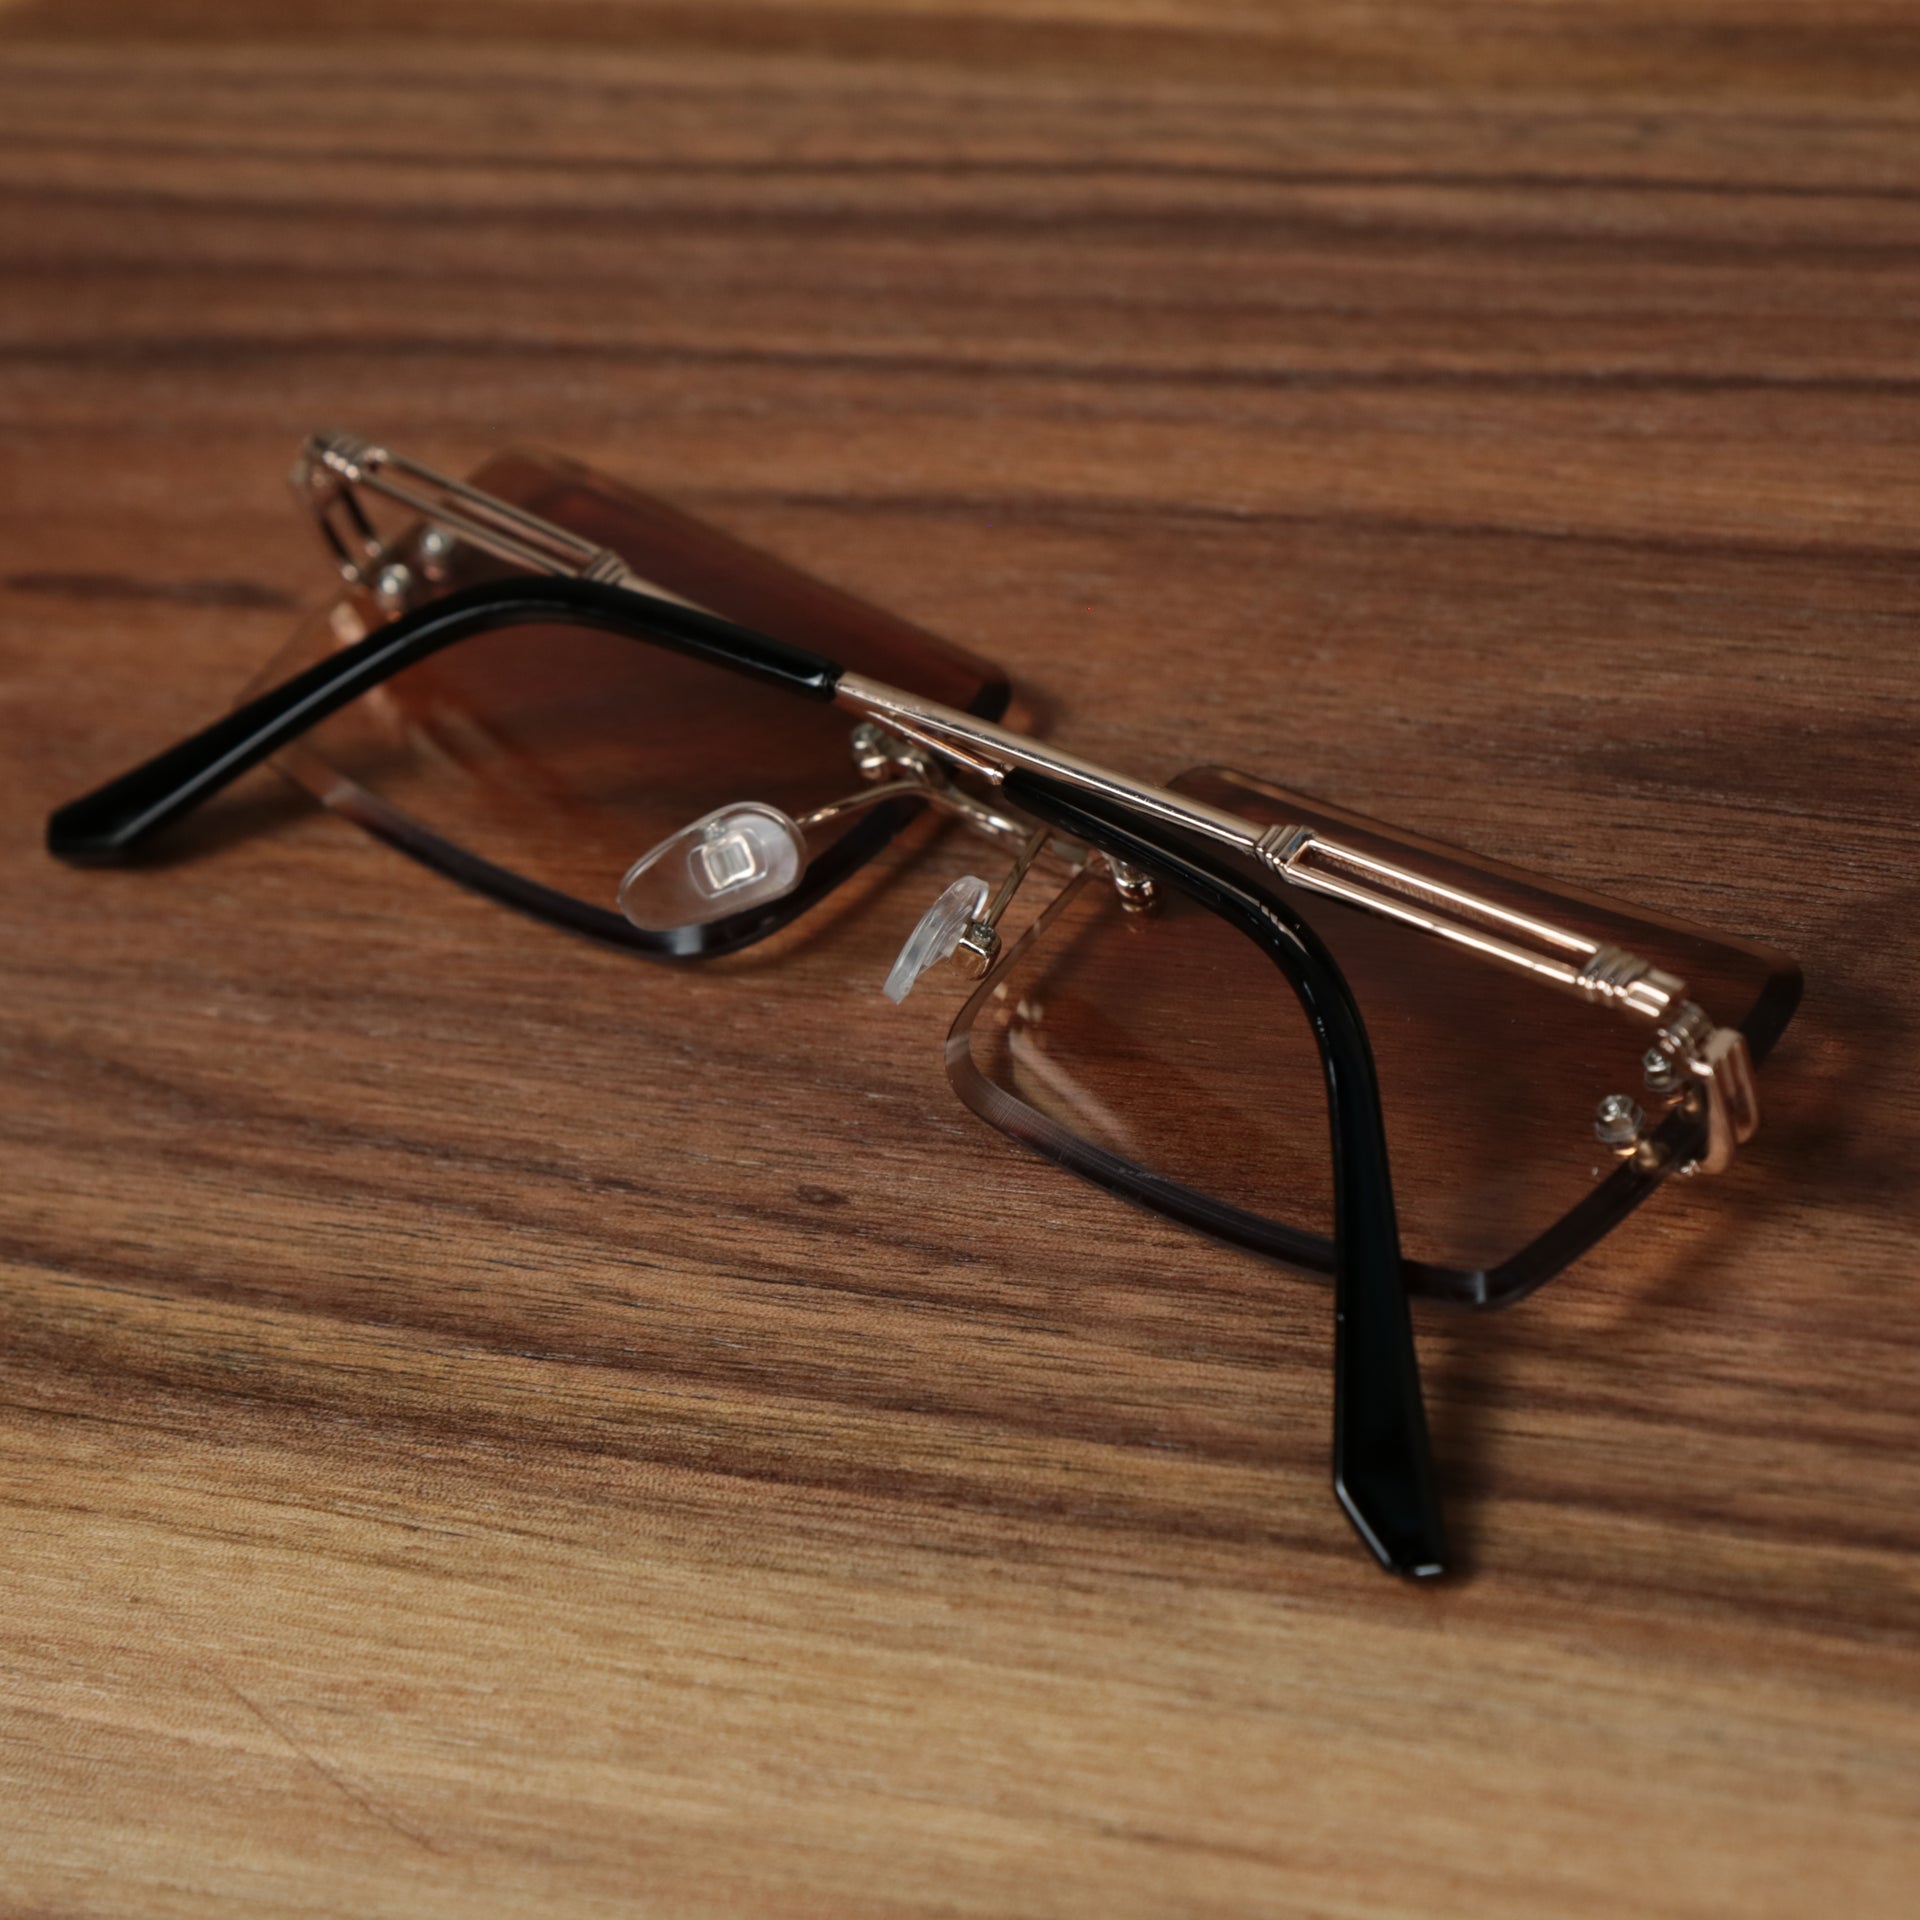 The Rectangle Frame Brown Lens Sunglasses with Gold Frame folded up